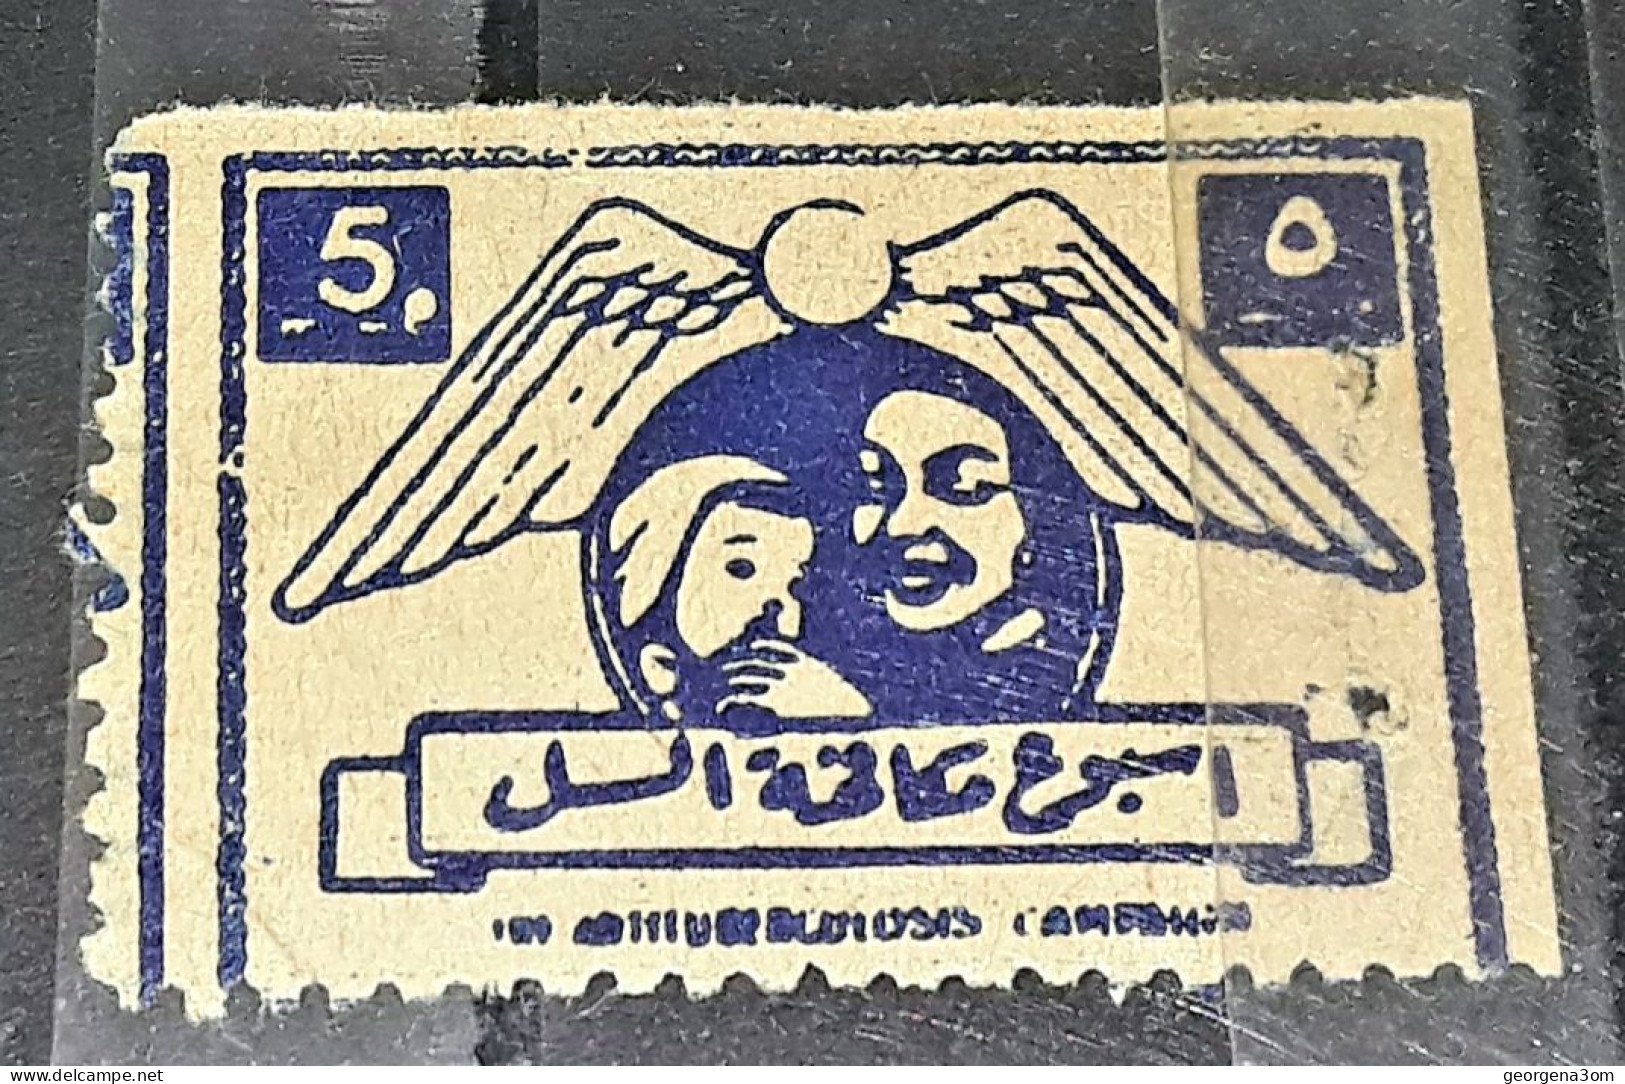 EGYPT VERY RARE OLD LABEL AGAINST TUBERCULOSIS ... VERY HARD TO FIND THIS LABEL - Etiquetas De Hotel